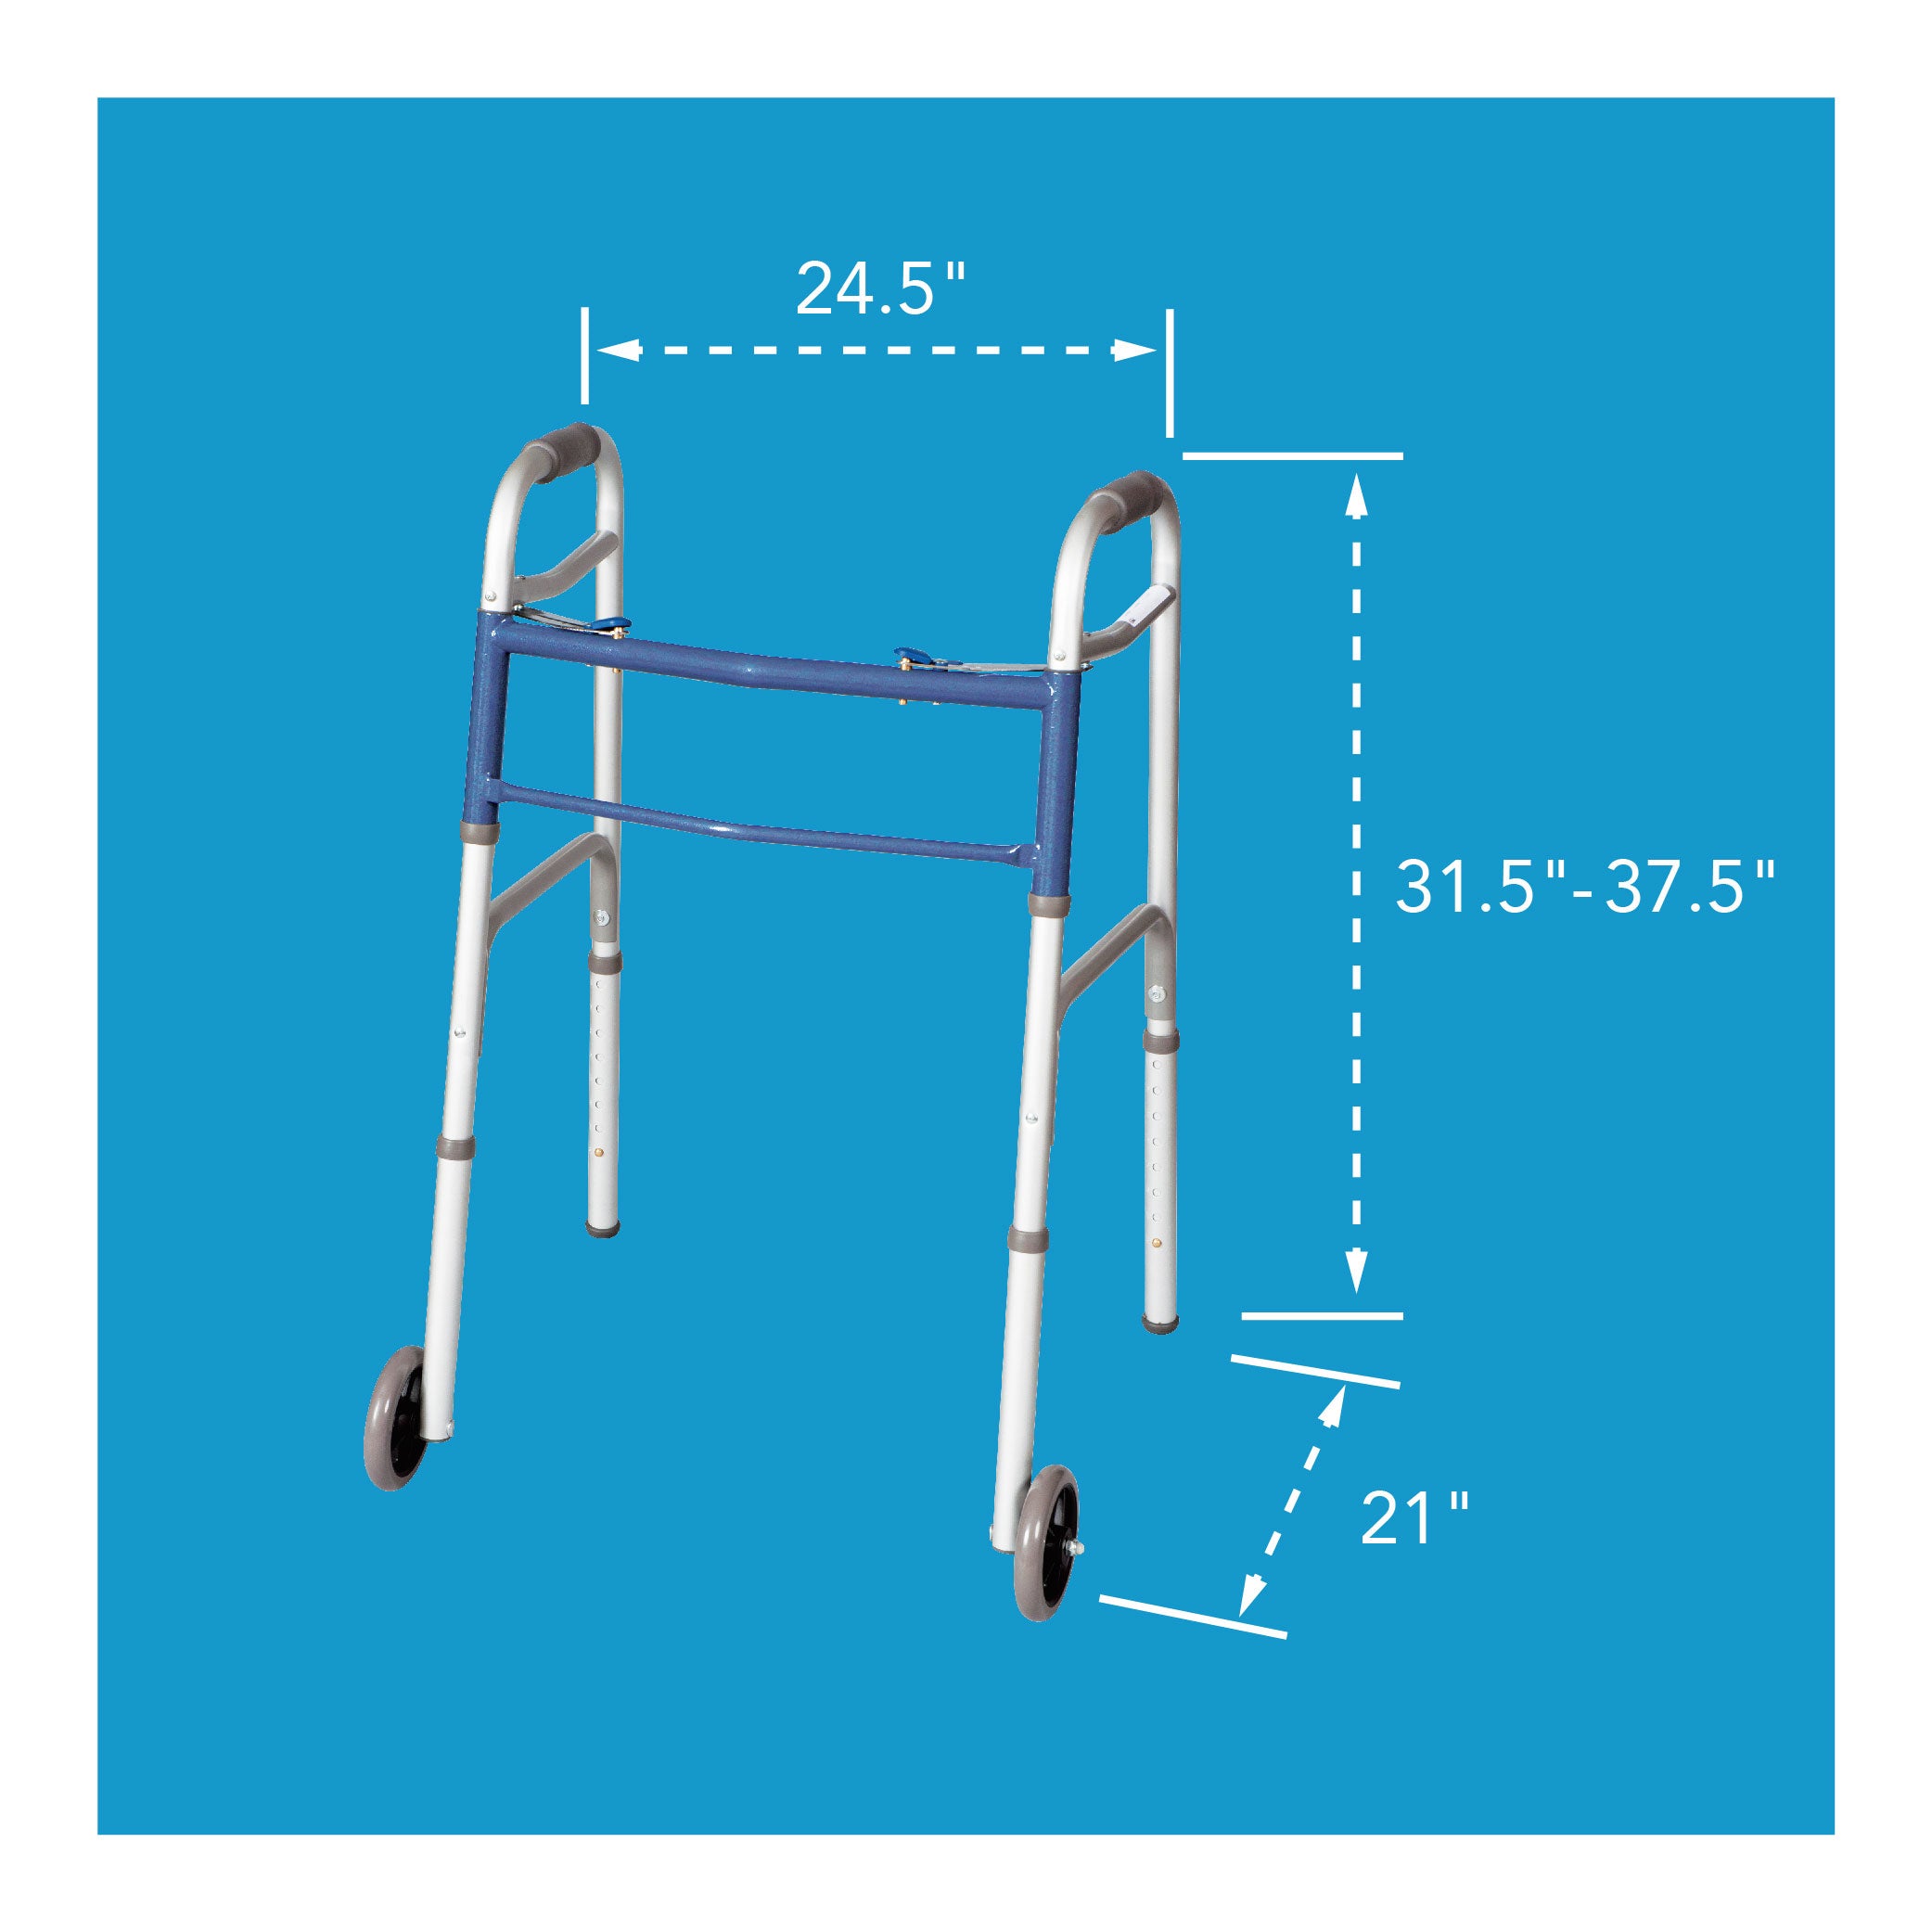 A folding walker with wheels next to size dimensions. 31.5